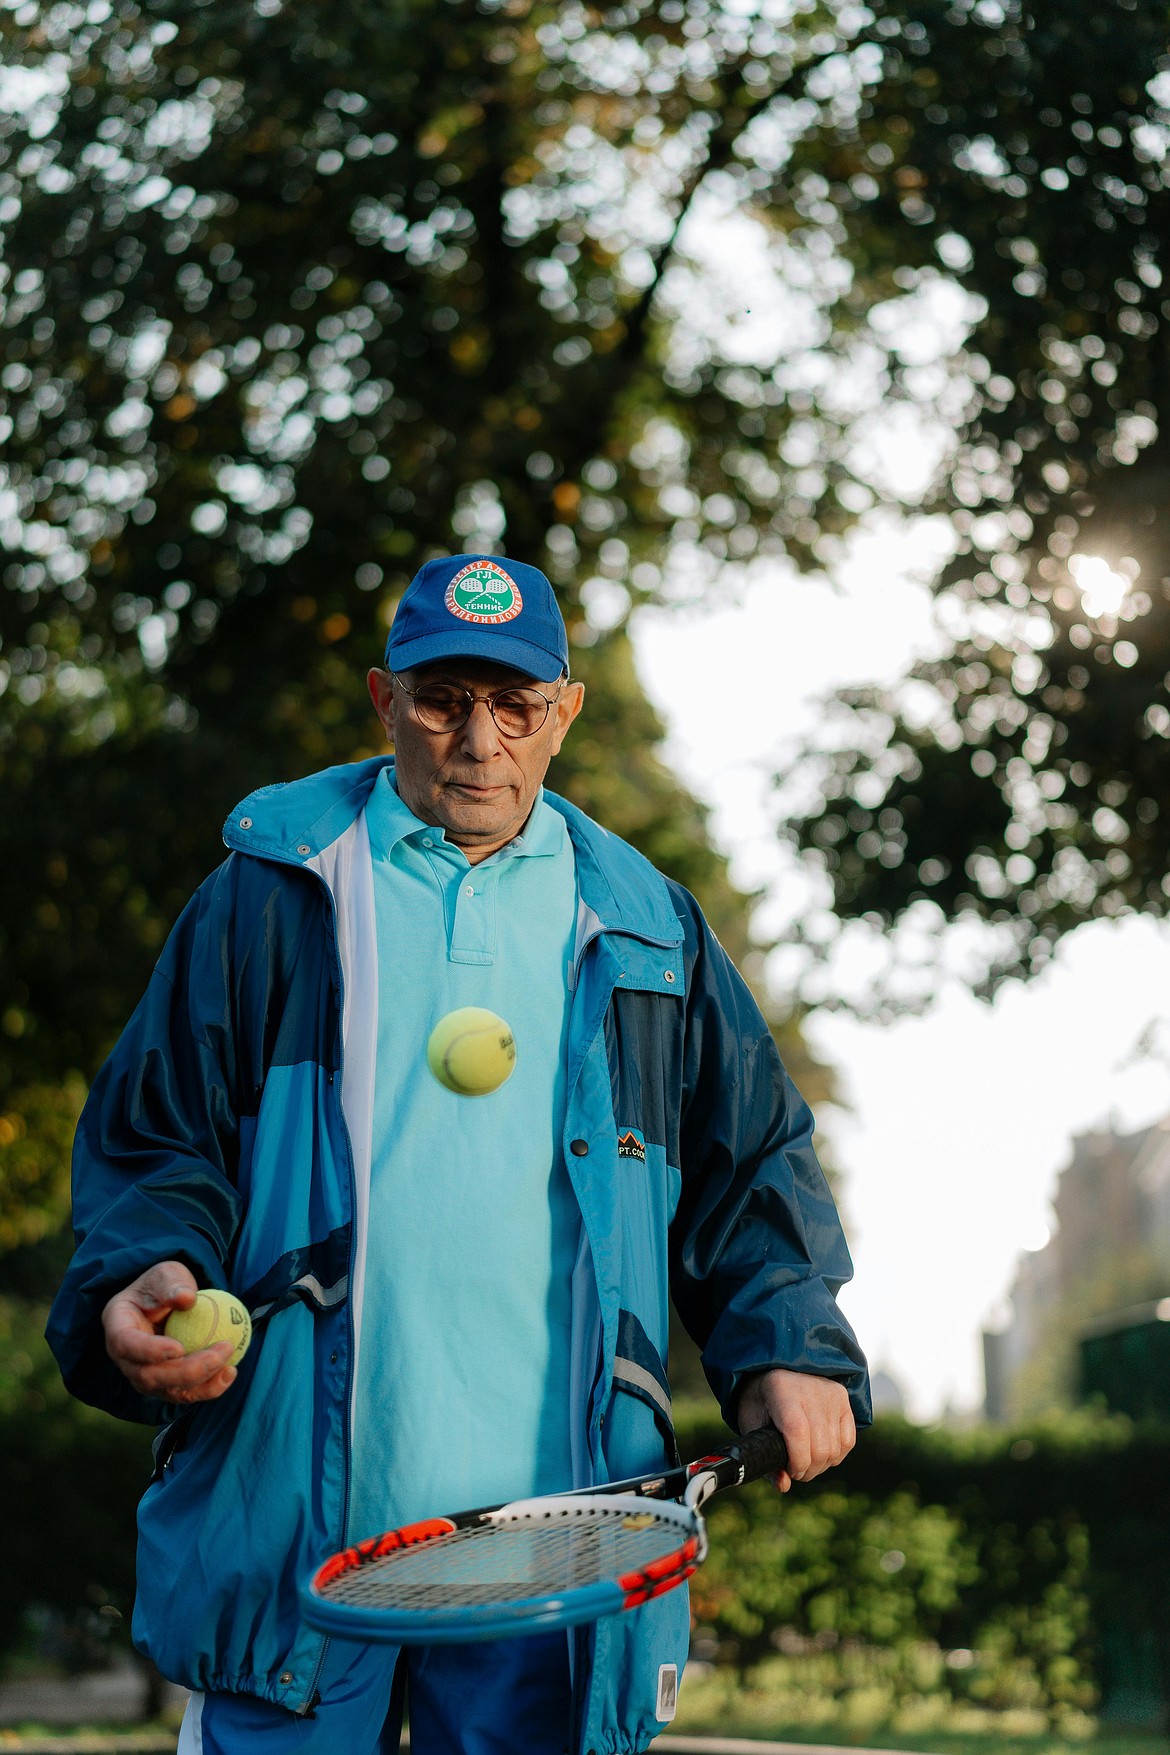 Not every older American is going to want to play tennis or run a marathon, but keeping active can positively contribute to quality of life, regardless of what a person's life goals are.